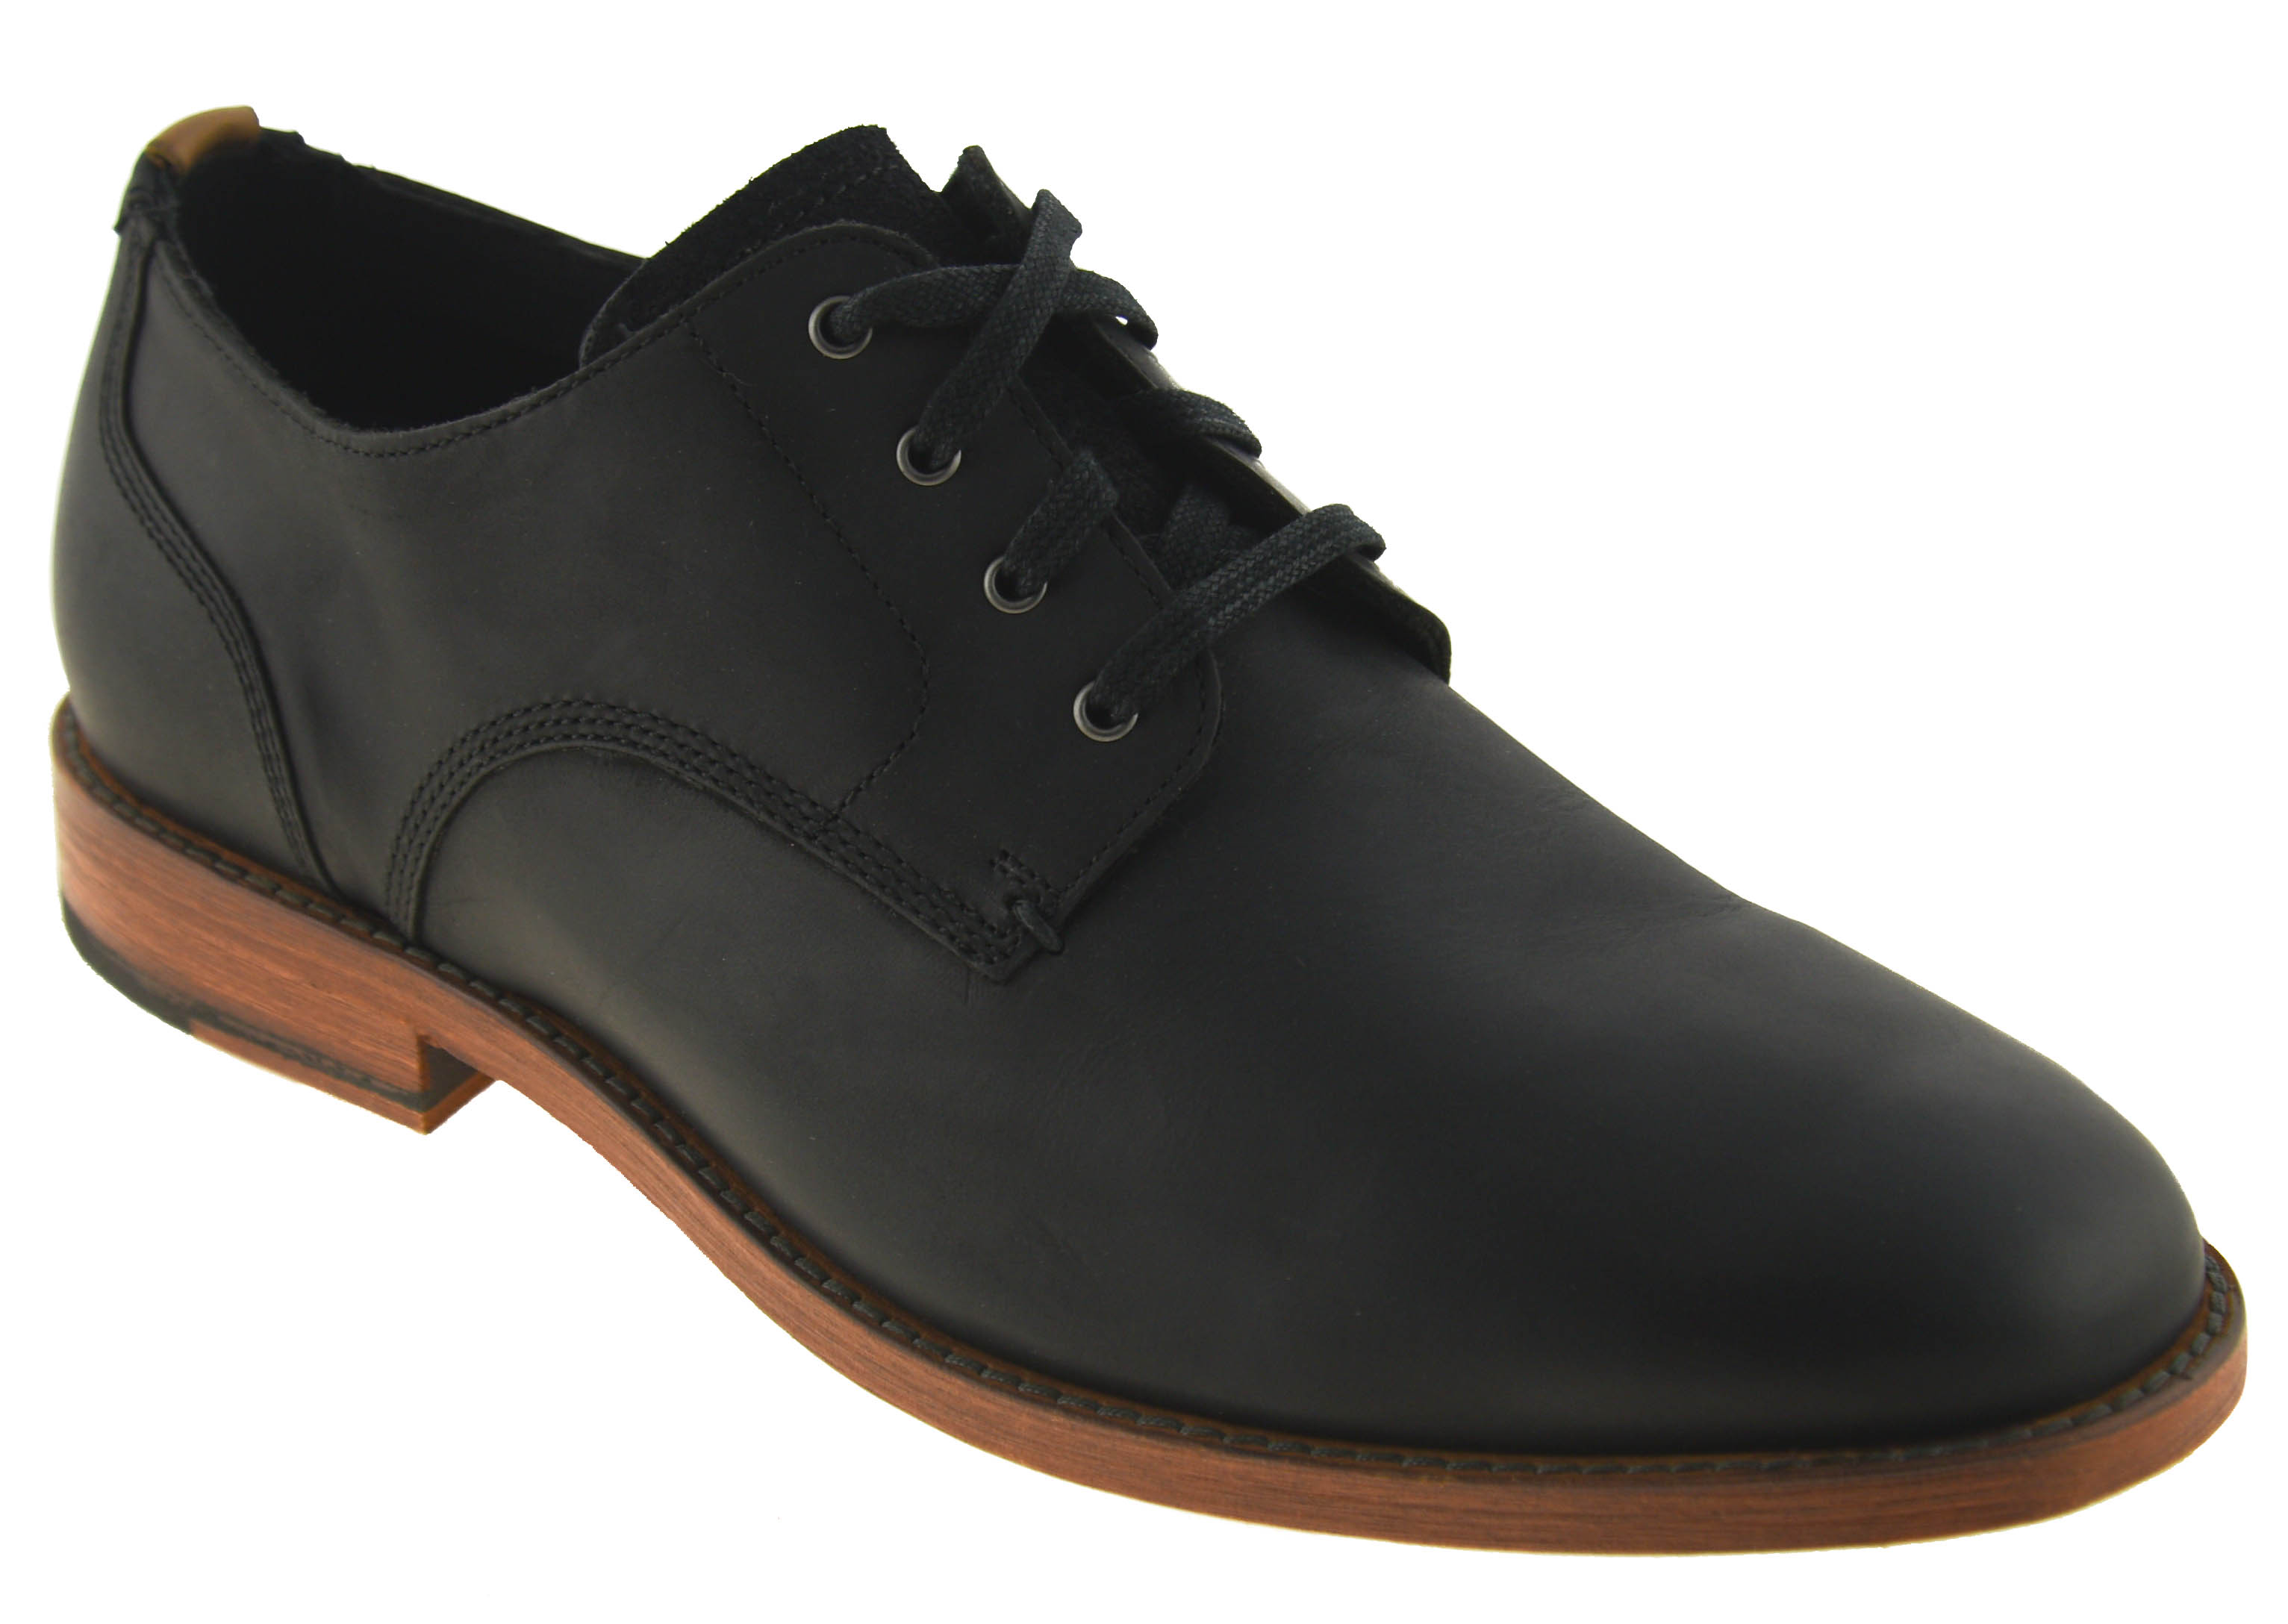 cole haan business casual shoes